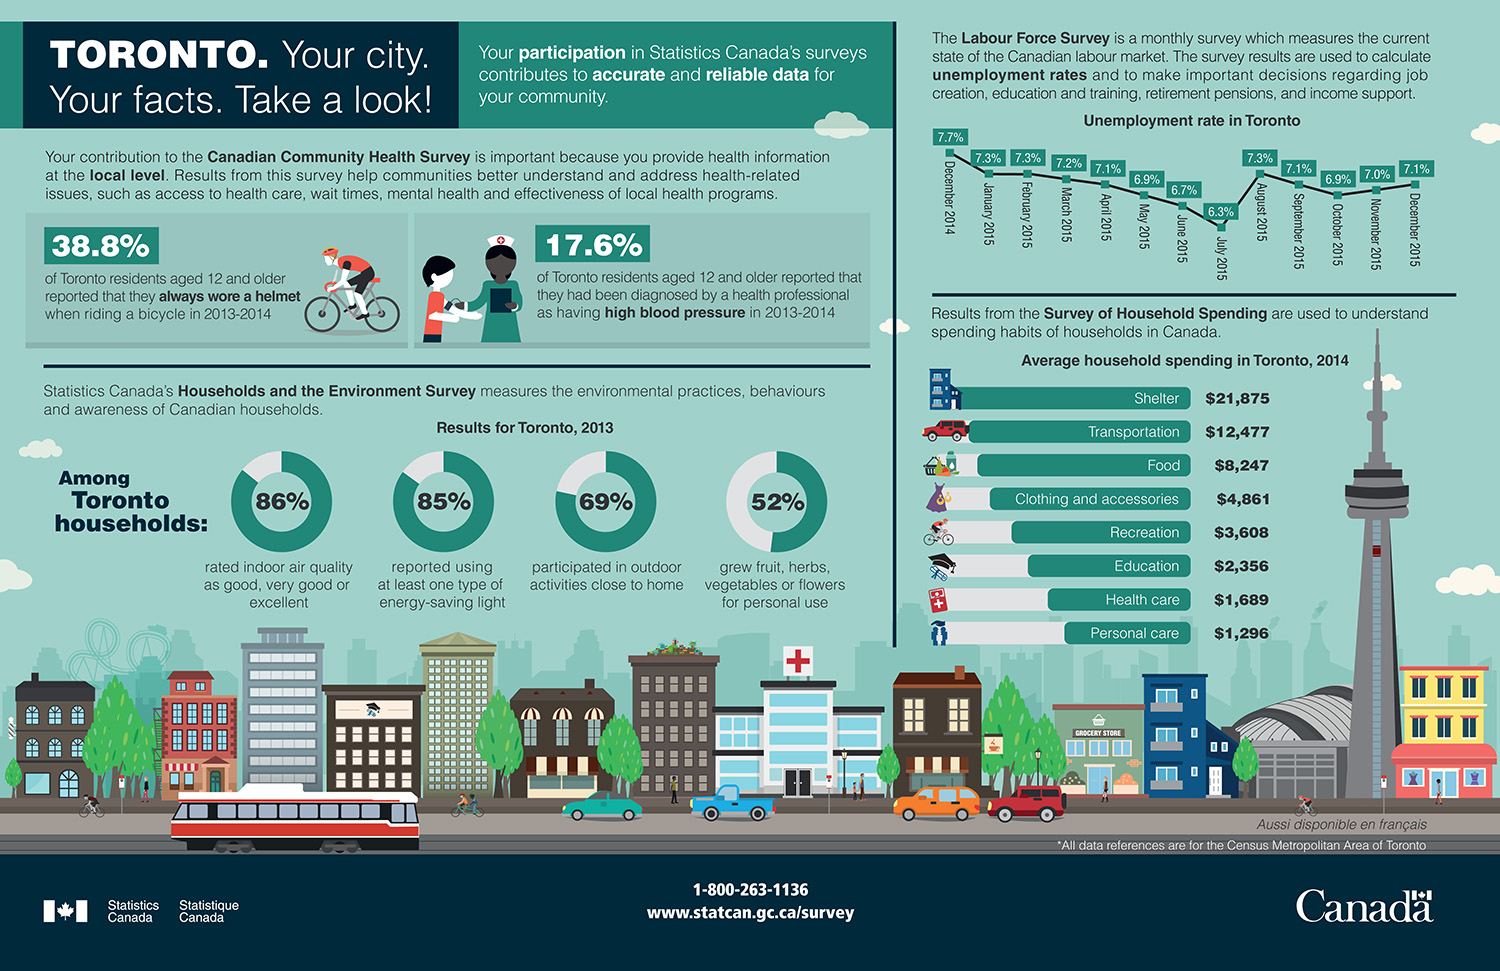 Infographic: TORONTO. Your city. Your facts. Take a look!